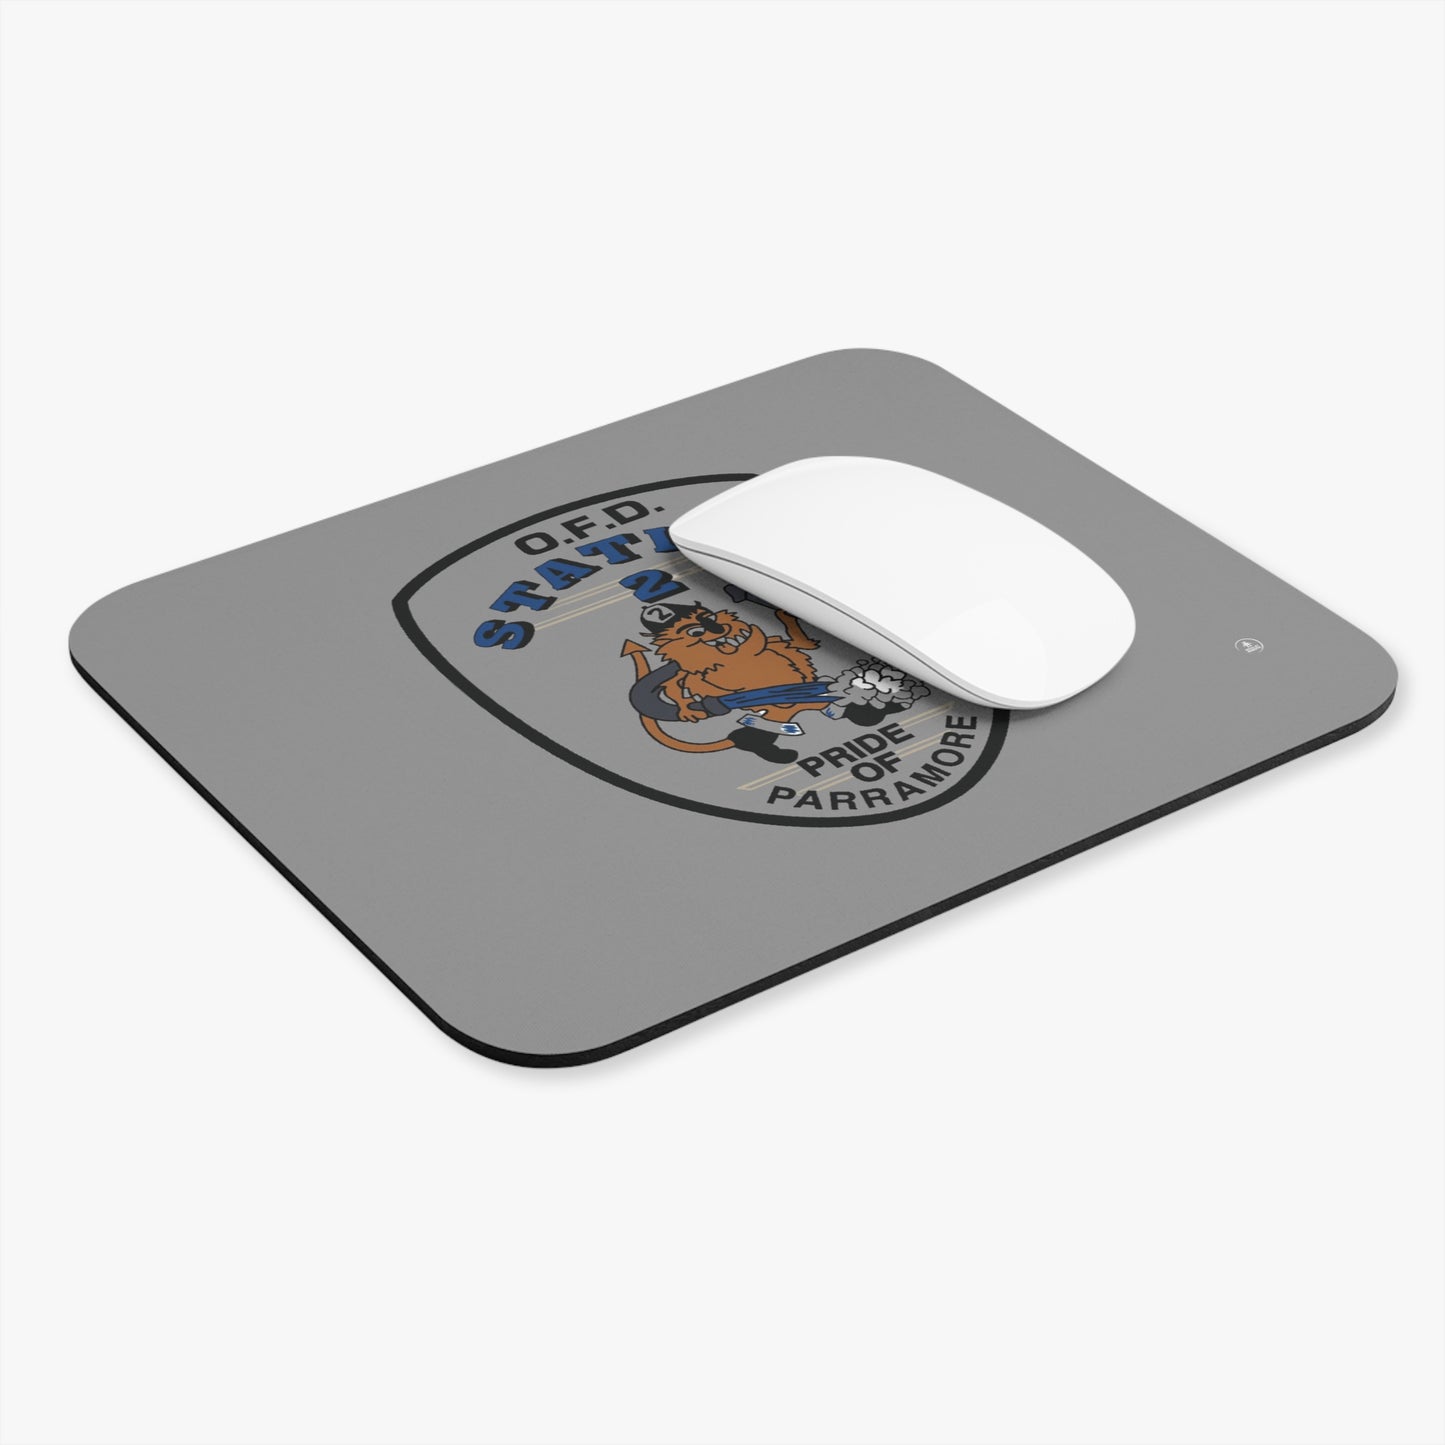 OFD Station 2 Logo Mouse Pad (Rectangle)